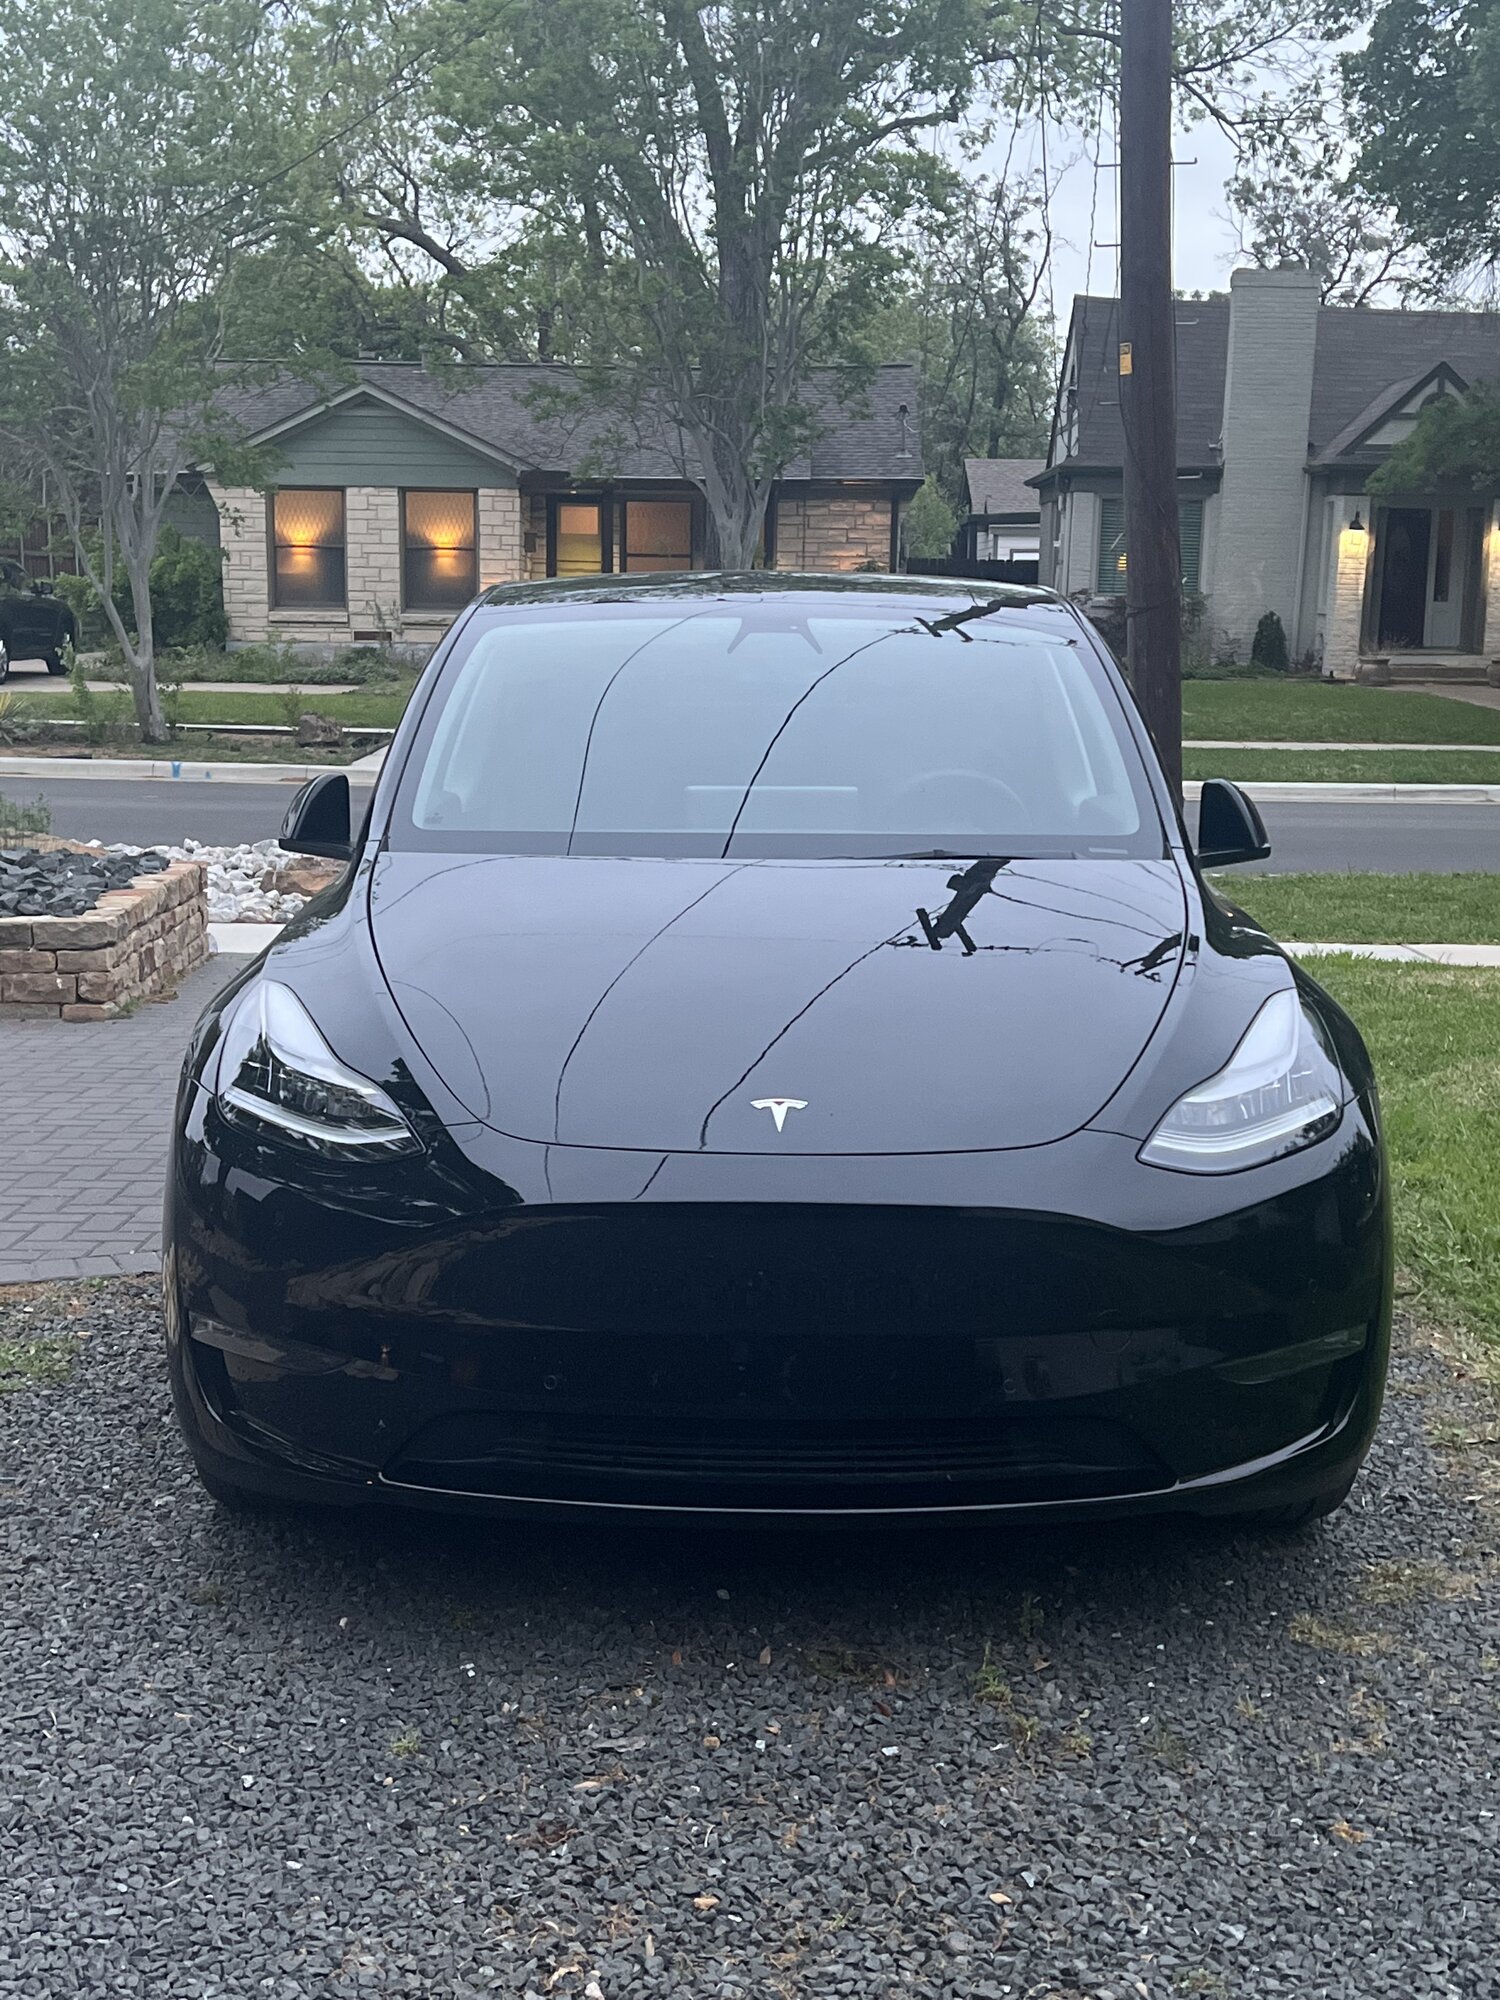 Tesla Y for sale in Dallas and more